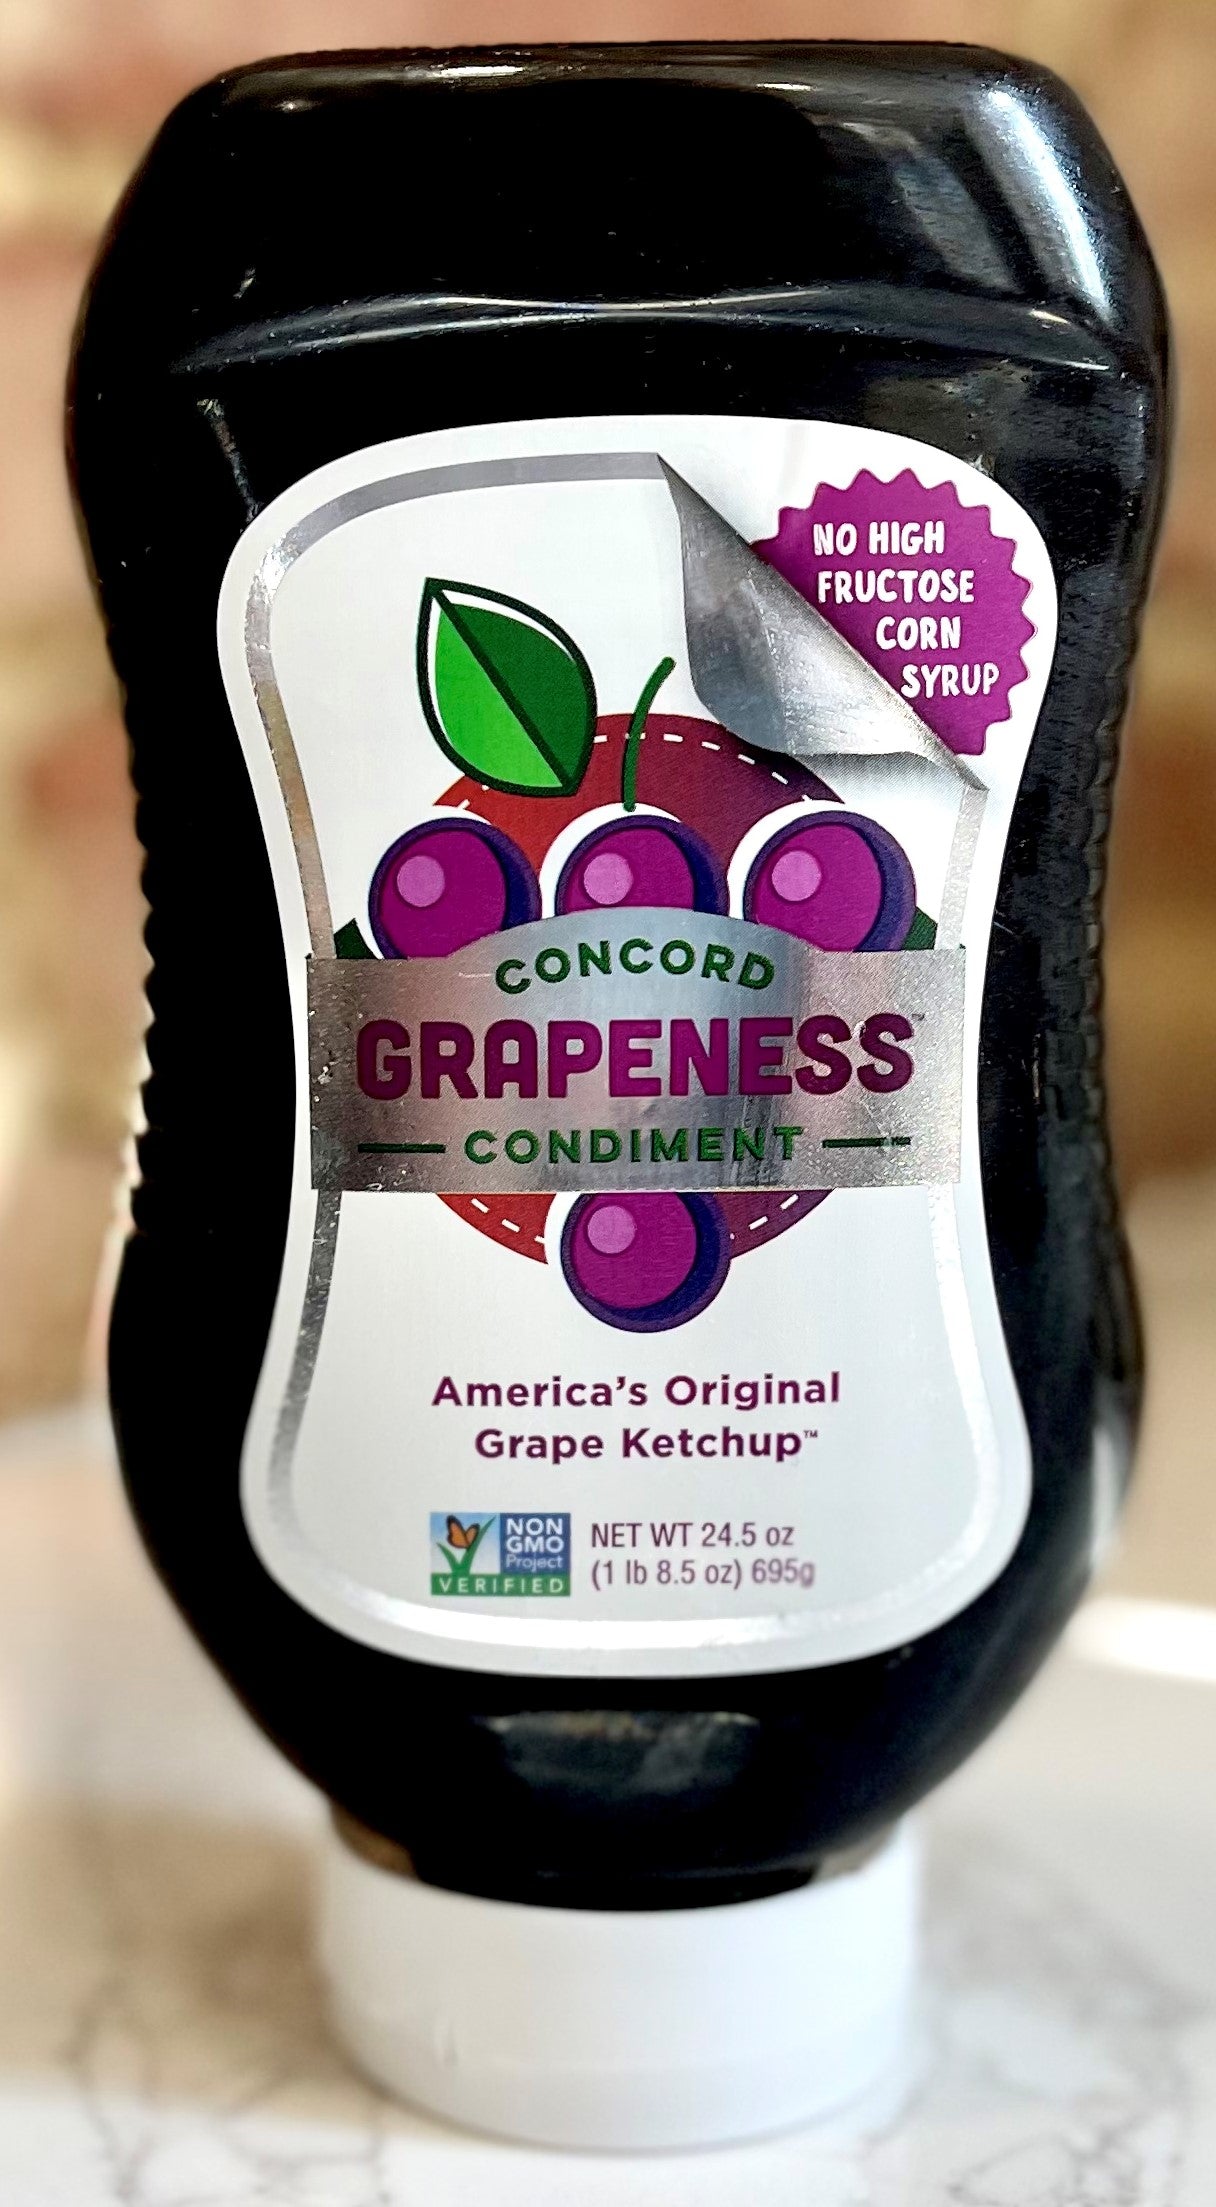 America’s First Grape Ketchup